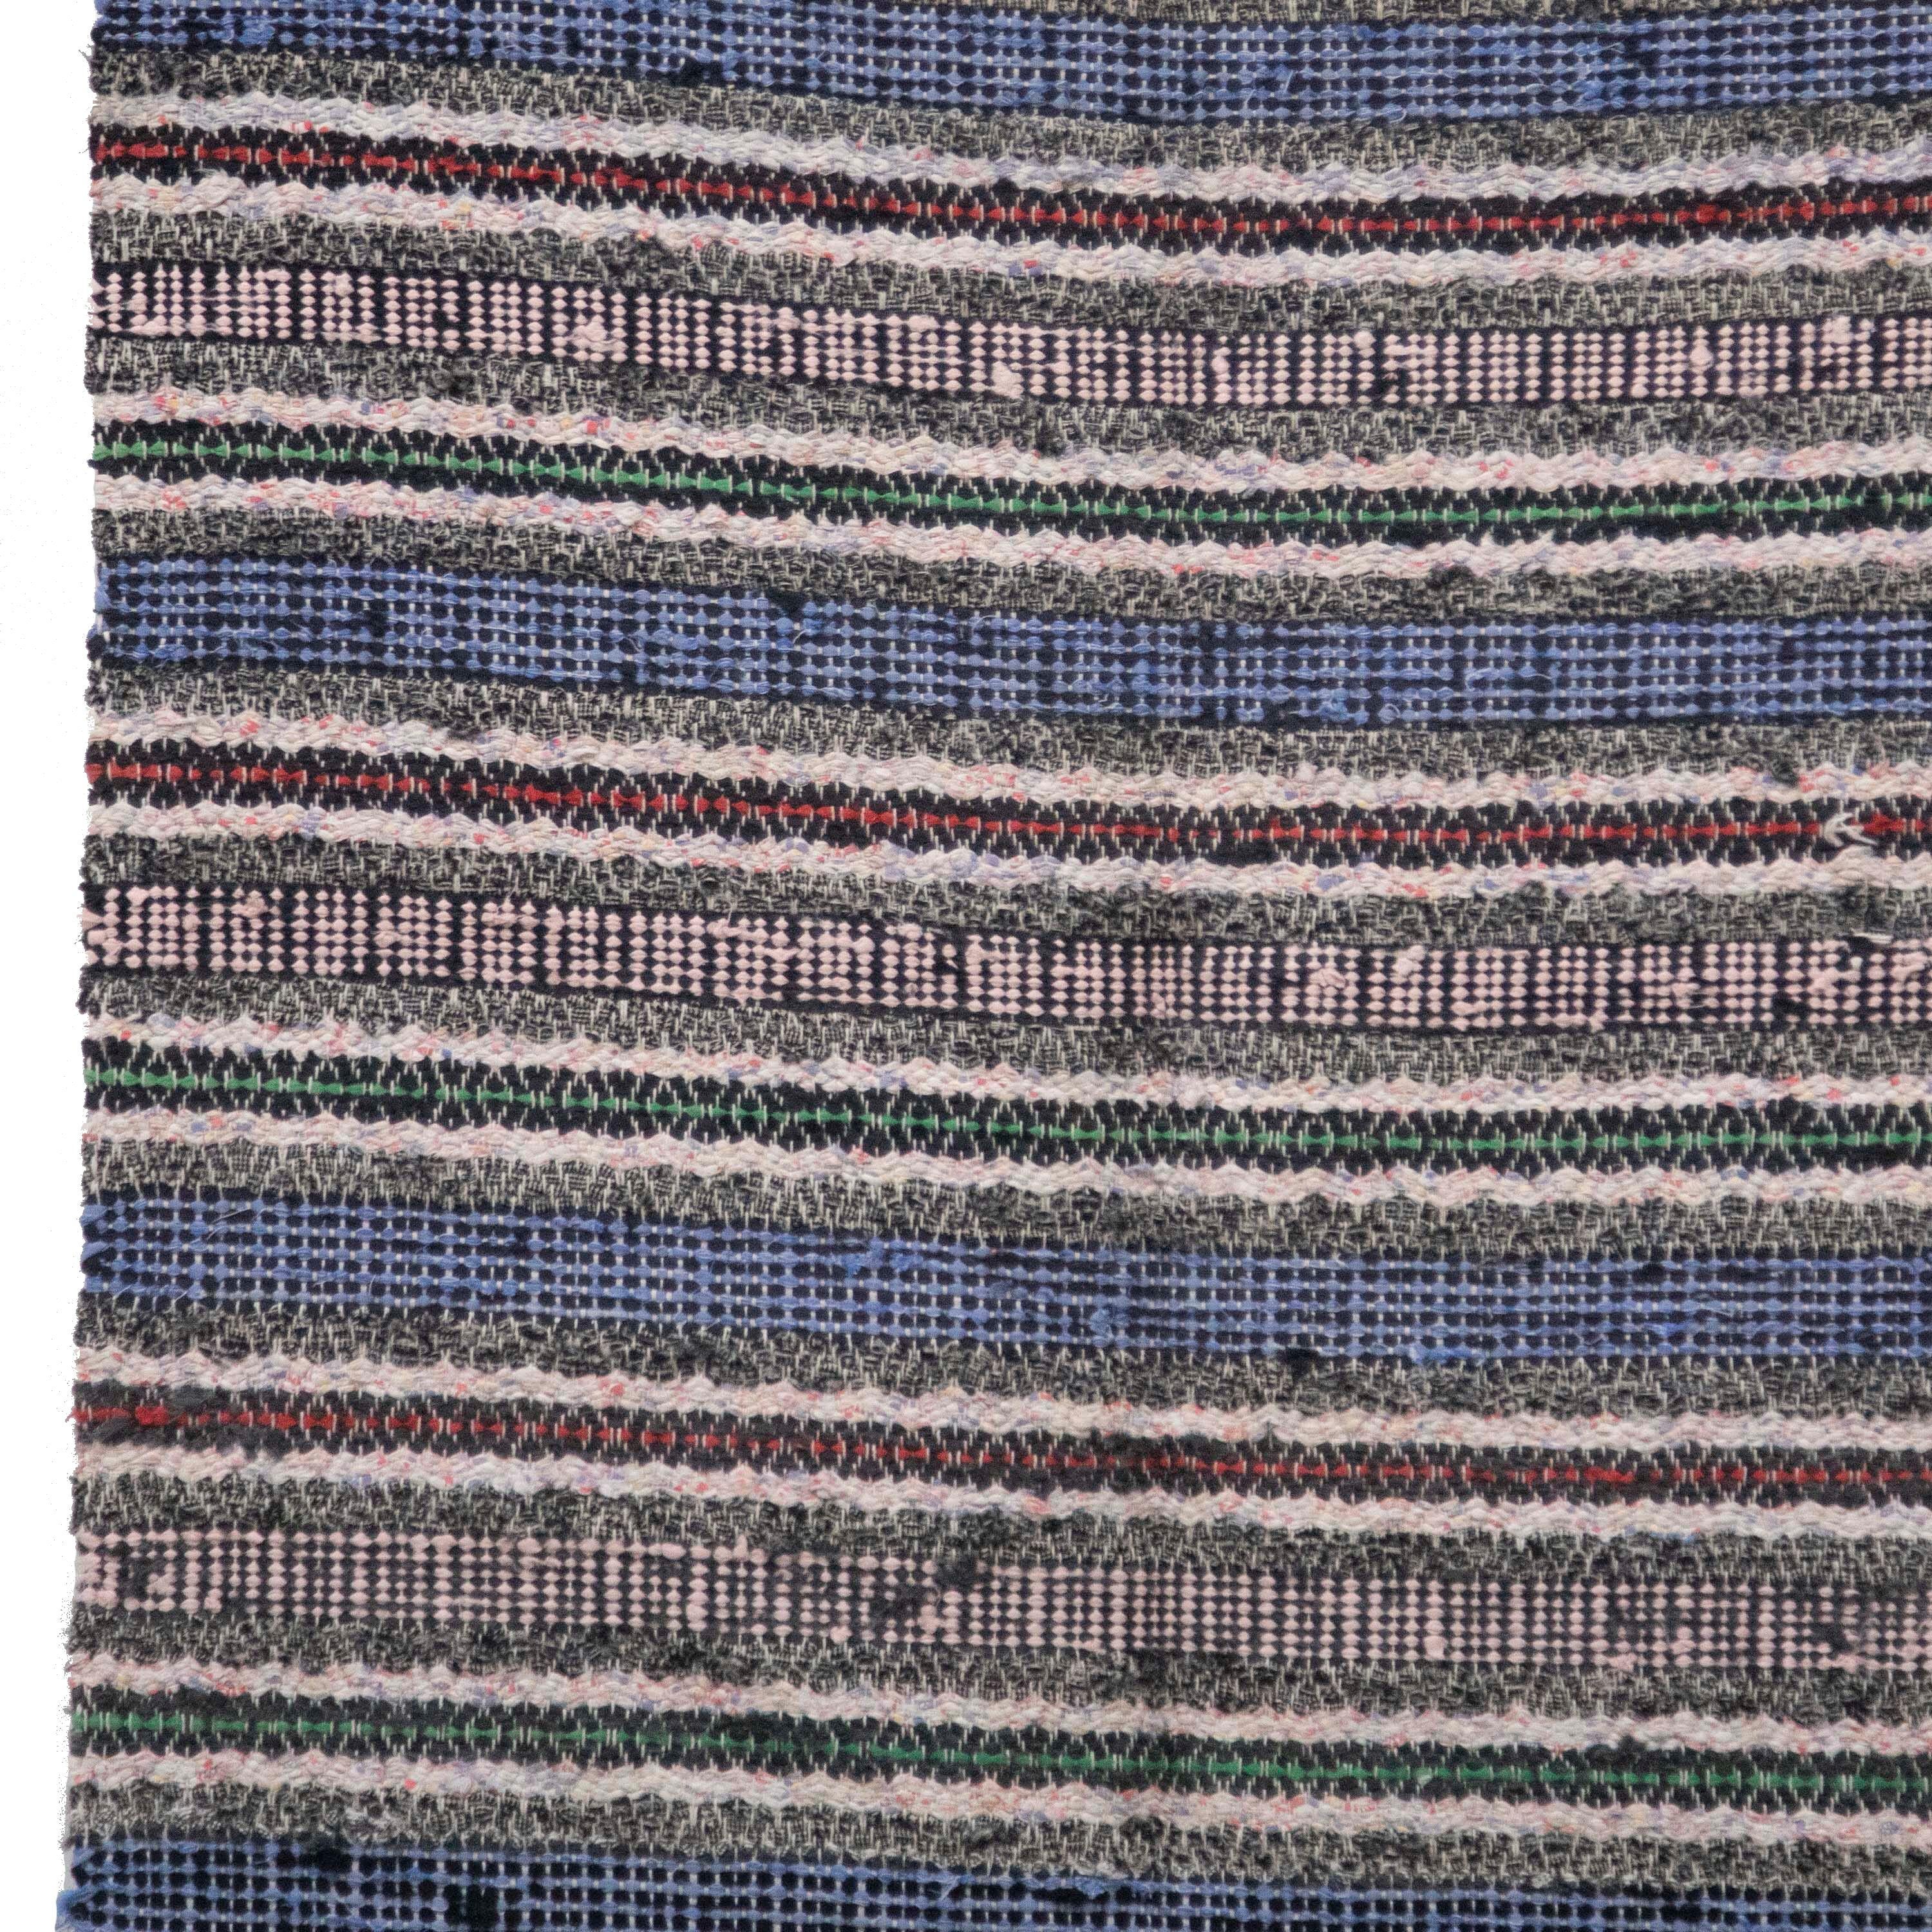 20th century Swedish rag rug. Featuring a large stripe design throughout in multicoloured tones. This rug can be machine-washed at 30 degrees.
RT6024581.